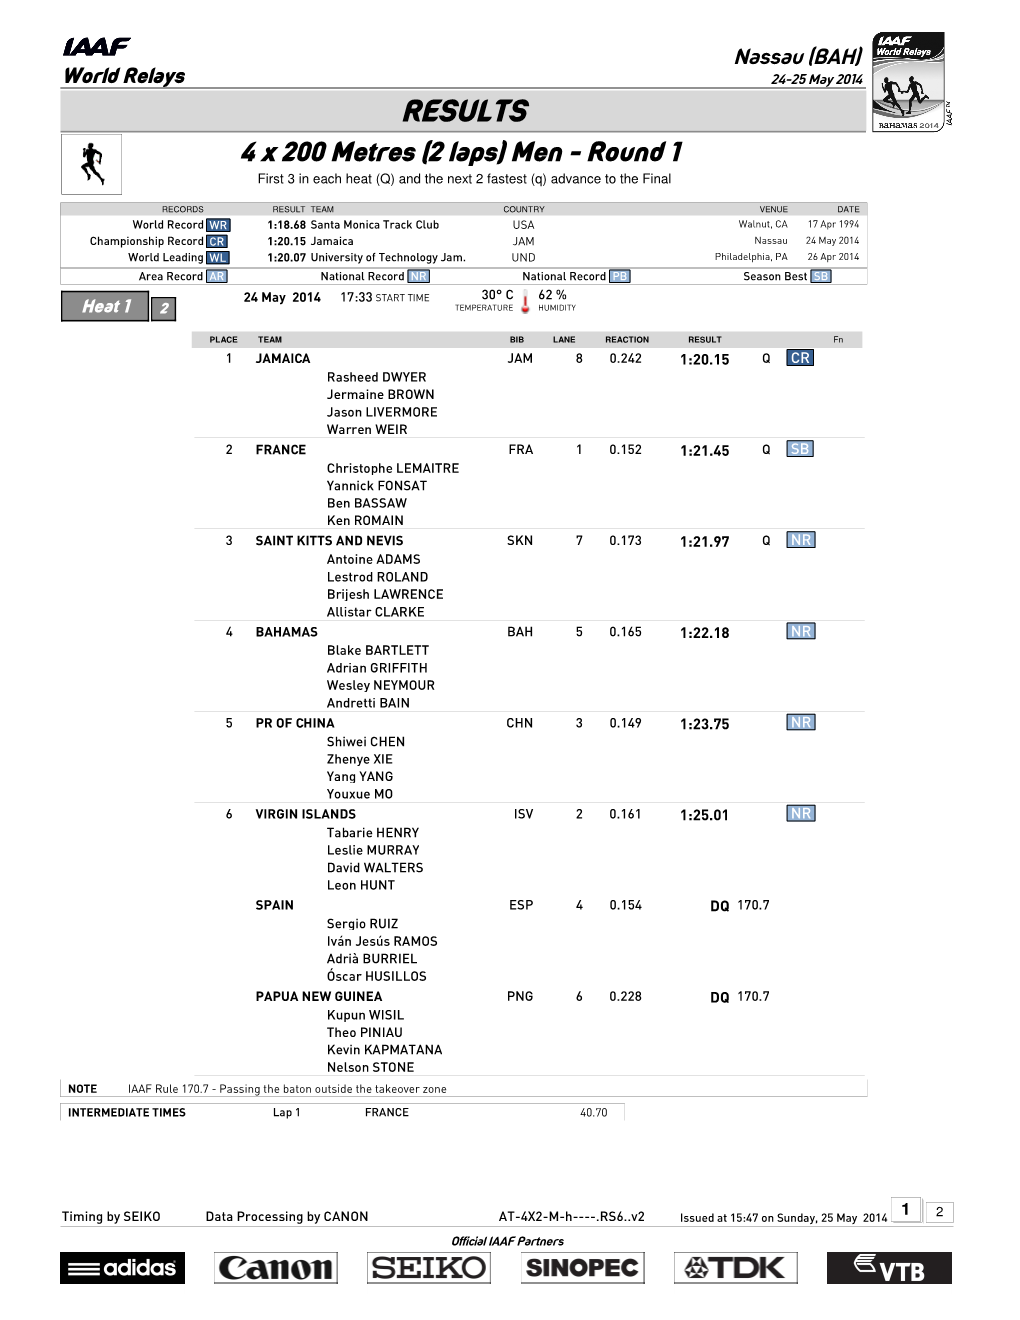 RESULTS 4 X 200 Metres (2 Laps) Men - Round 1 First 3 in Each Heat (Q) and the Next 2 Fastest (Q) Advance to the Final